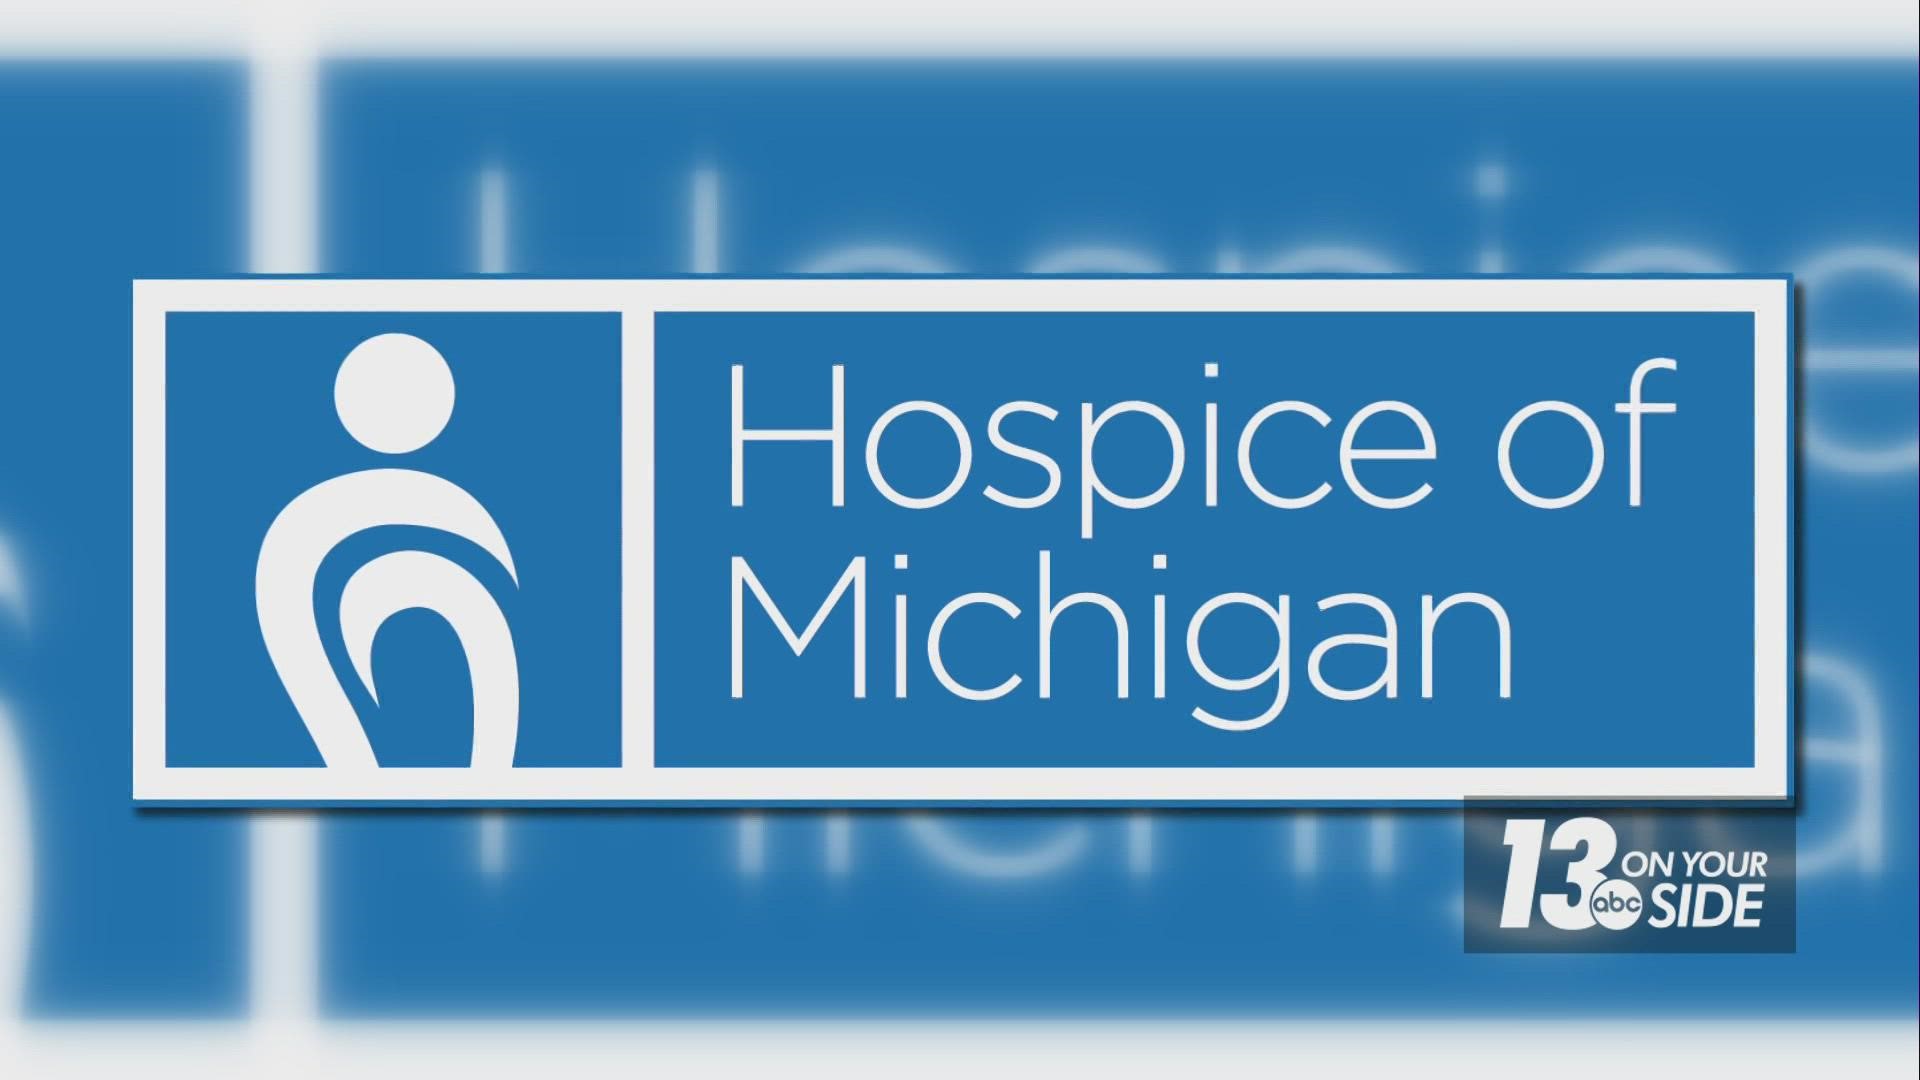 Senior Vice President and Chief Medical Officer Dr. Michael Paletta said one in five Hospice of Michigan patients is a veteran.